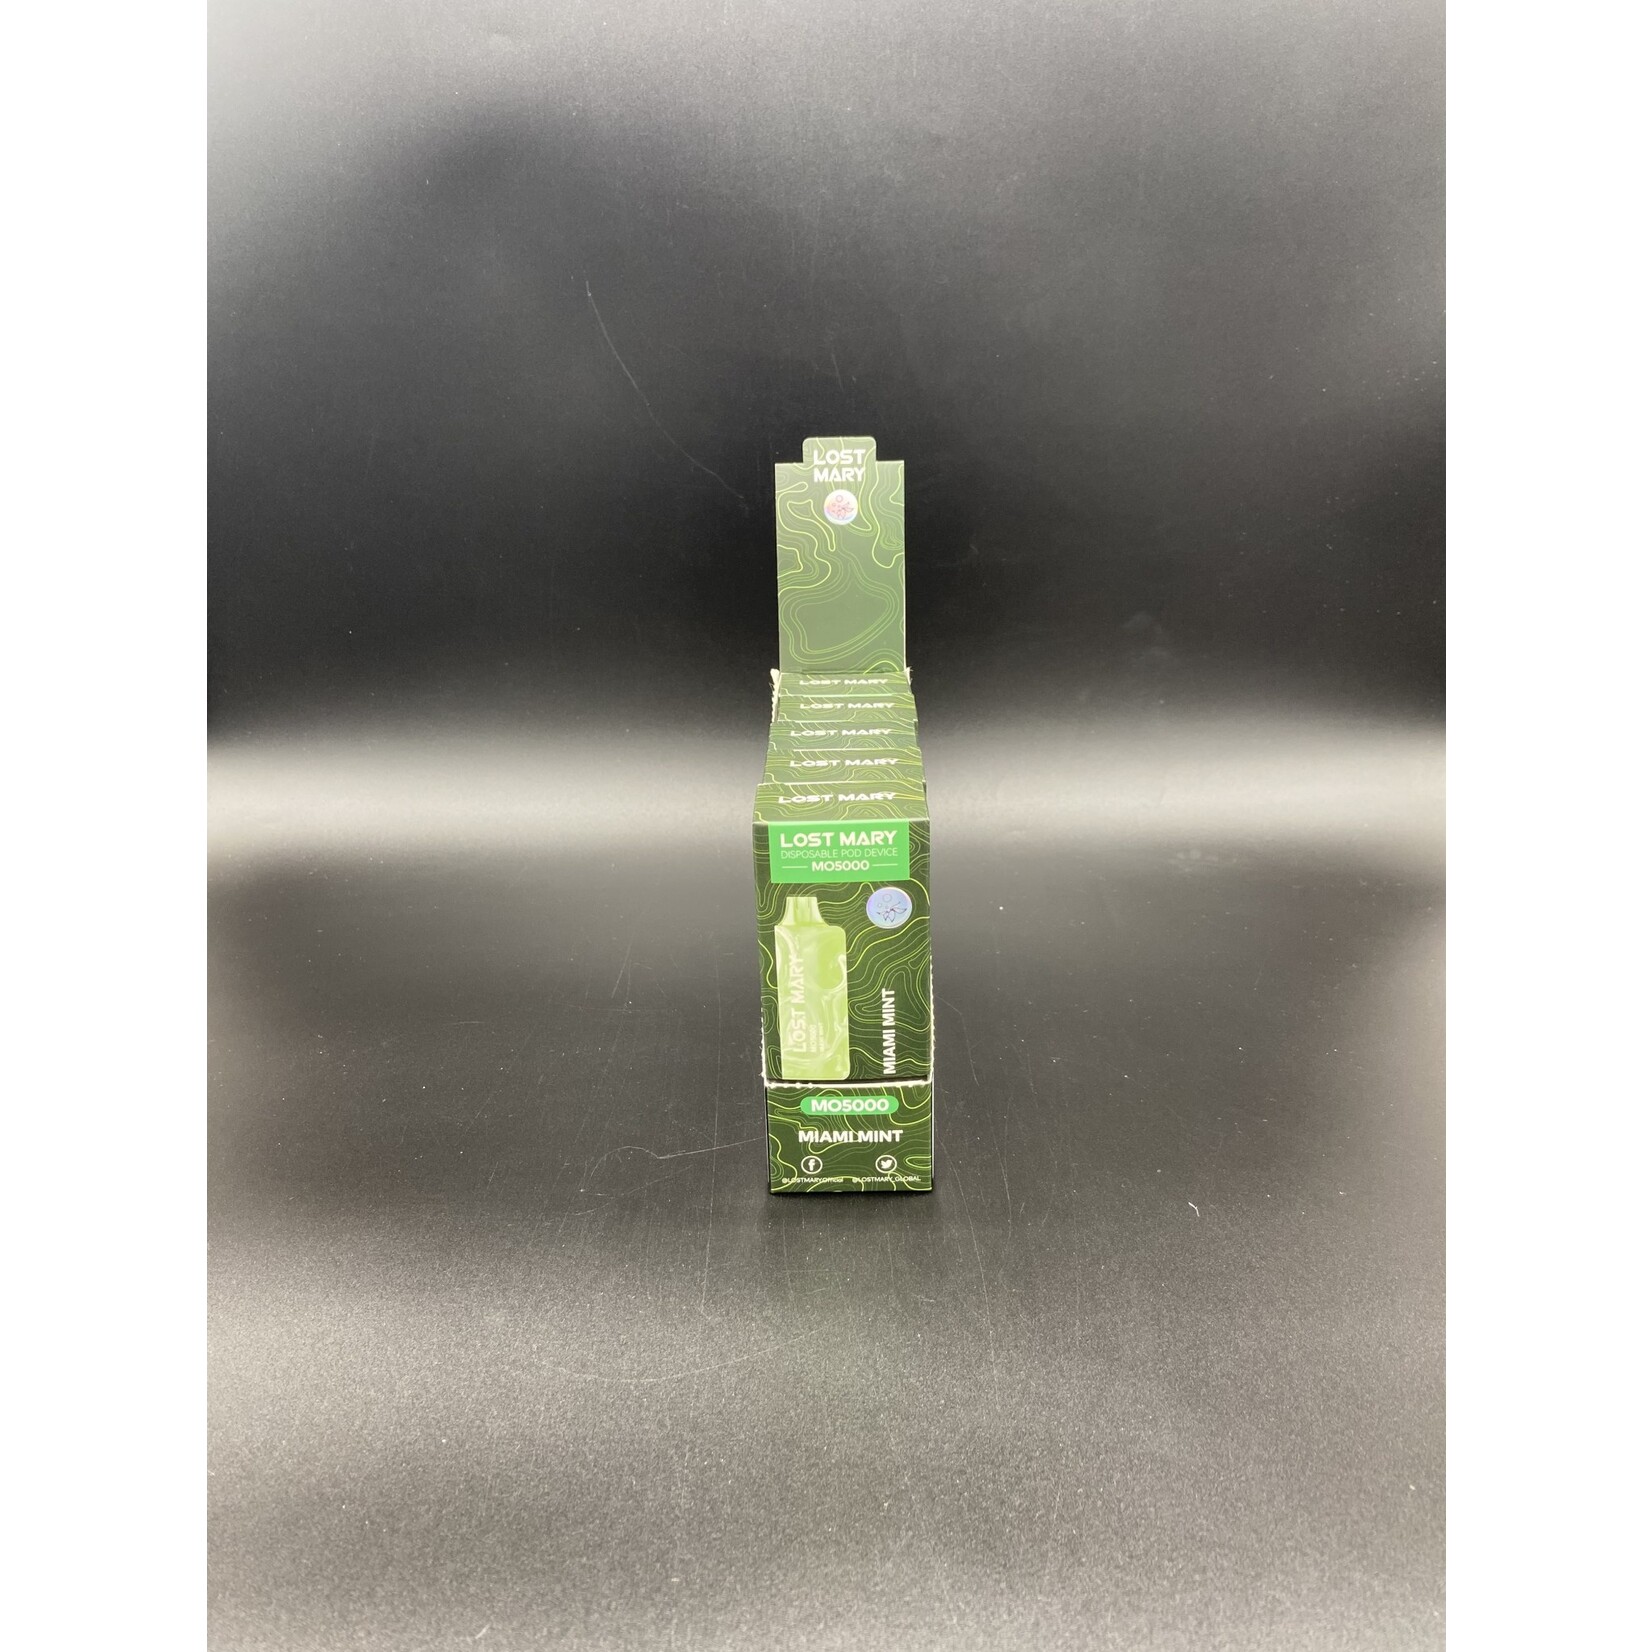 Lost Mary Lost Mary MO5000 - Disposable 13.5ml 5%